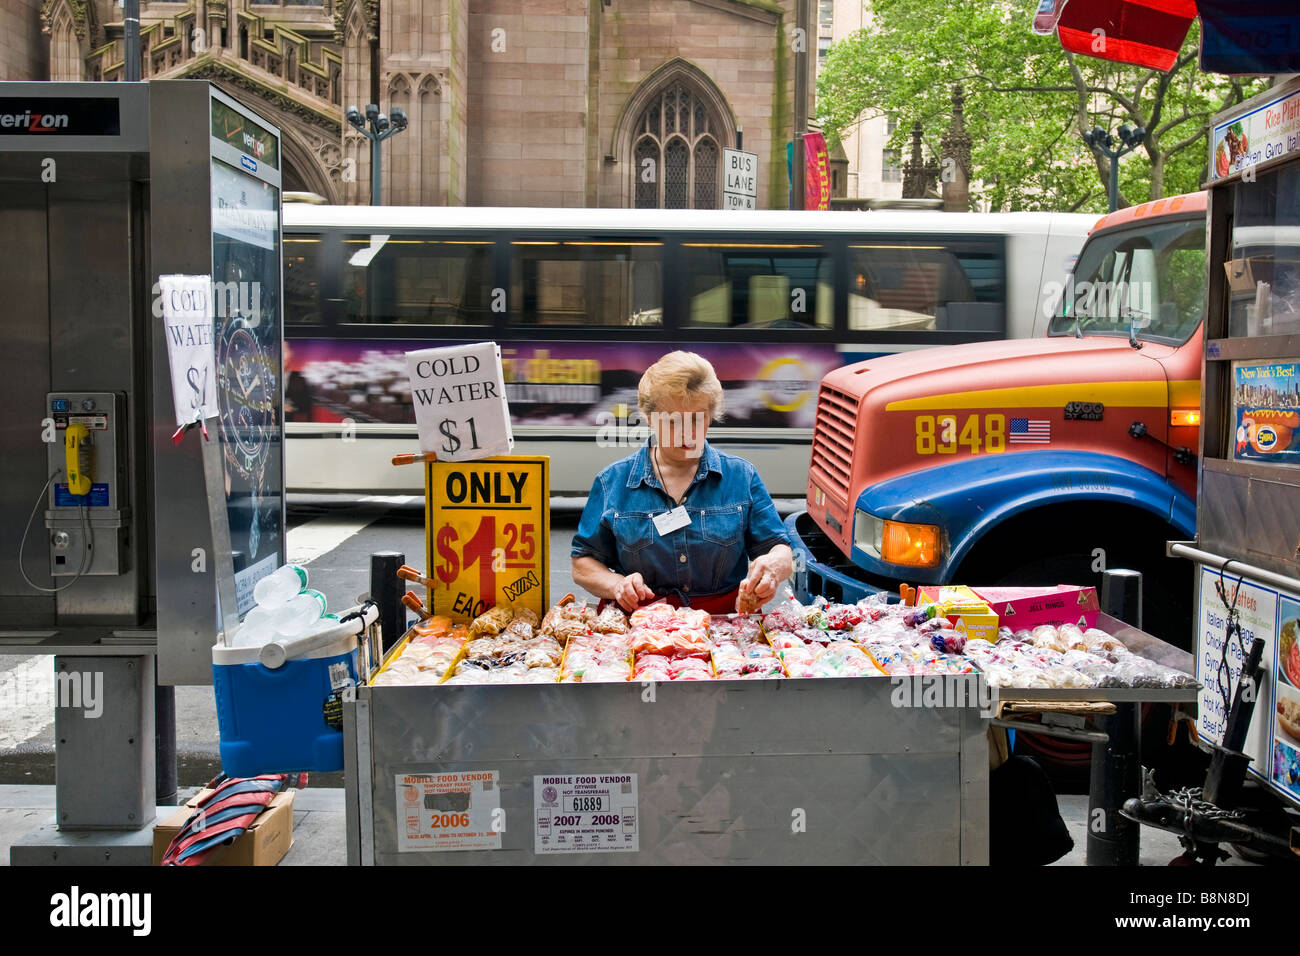 Street scene with stall selling cold water Stock Photo